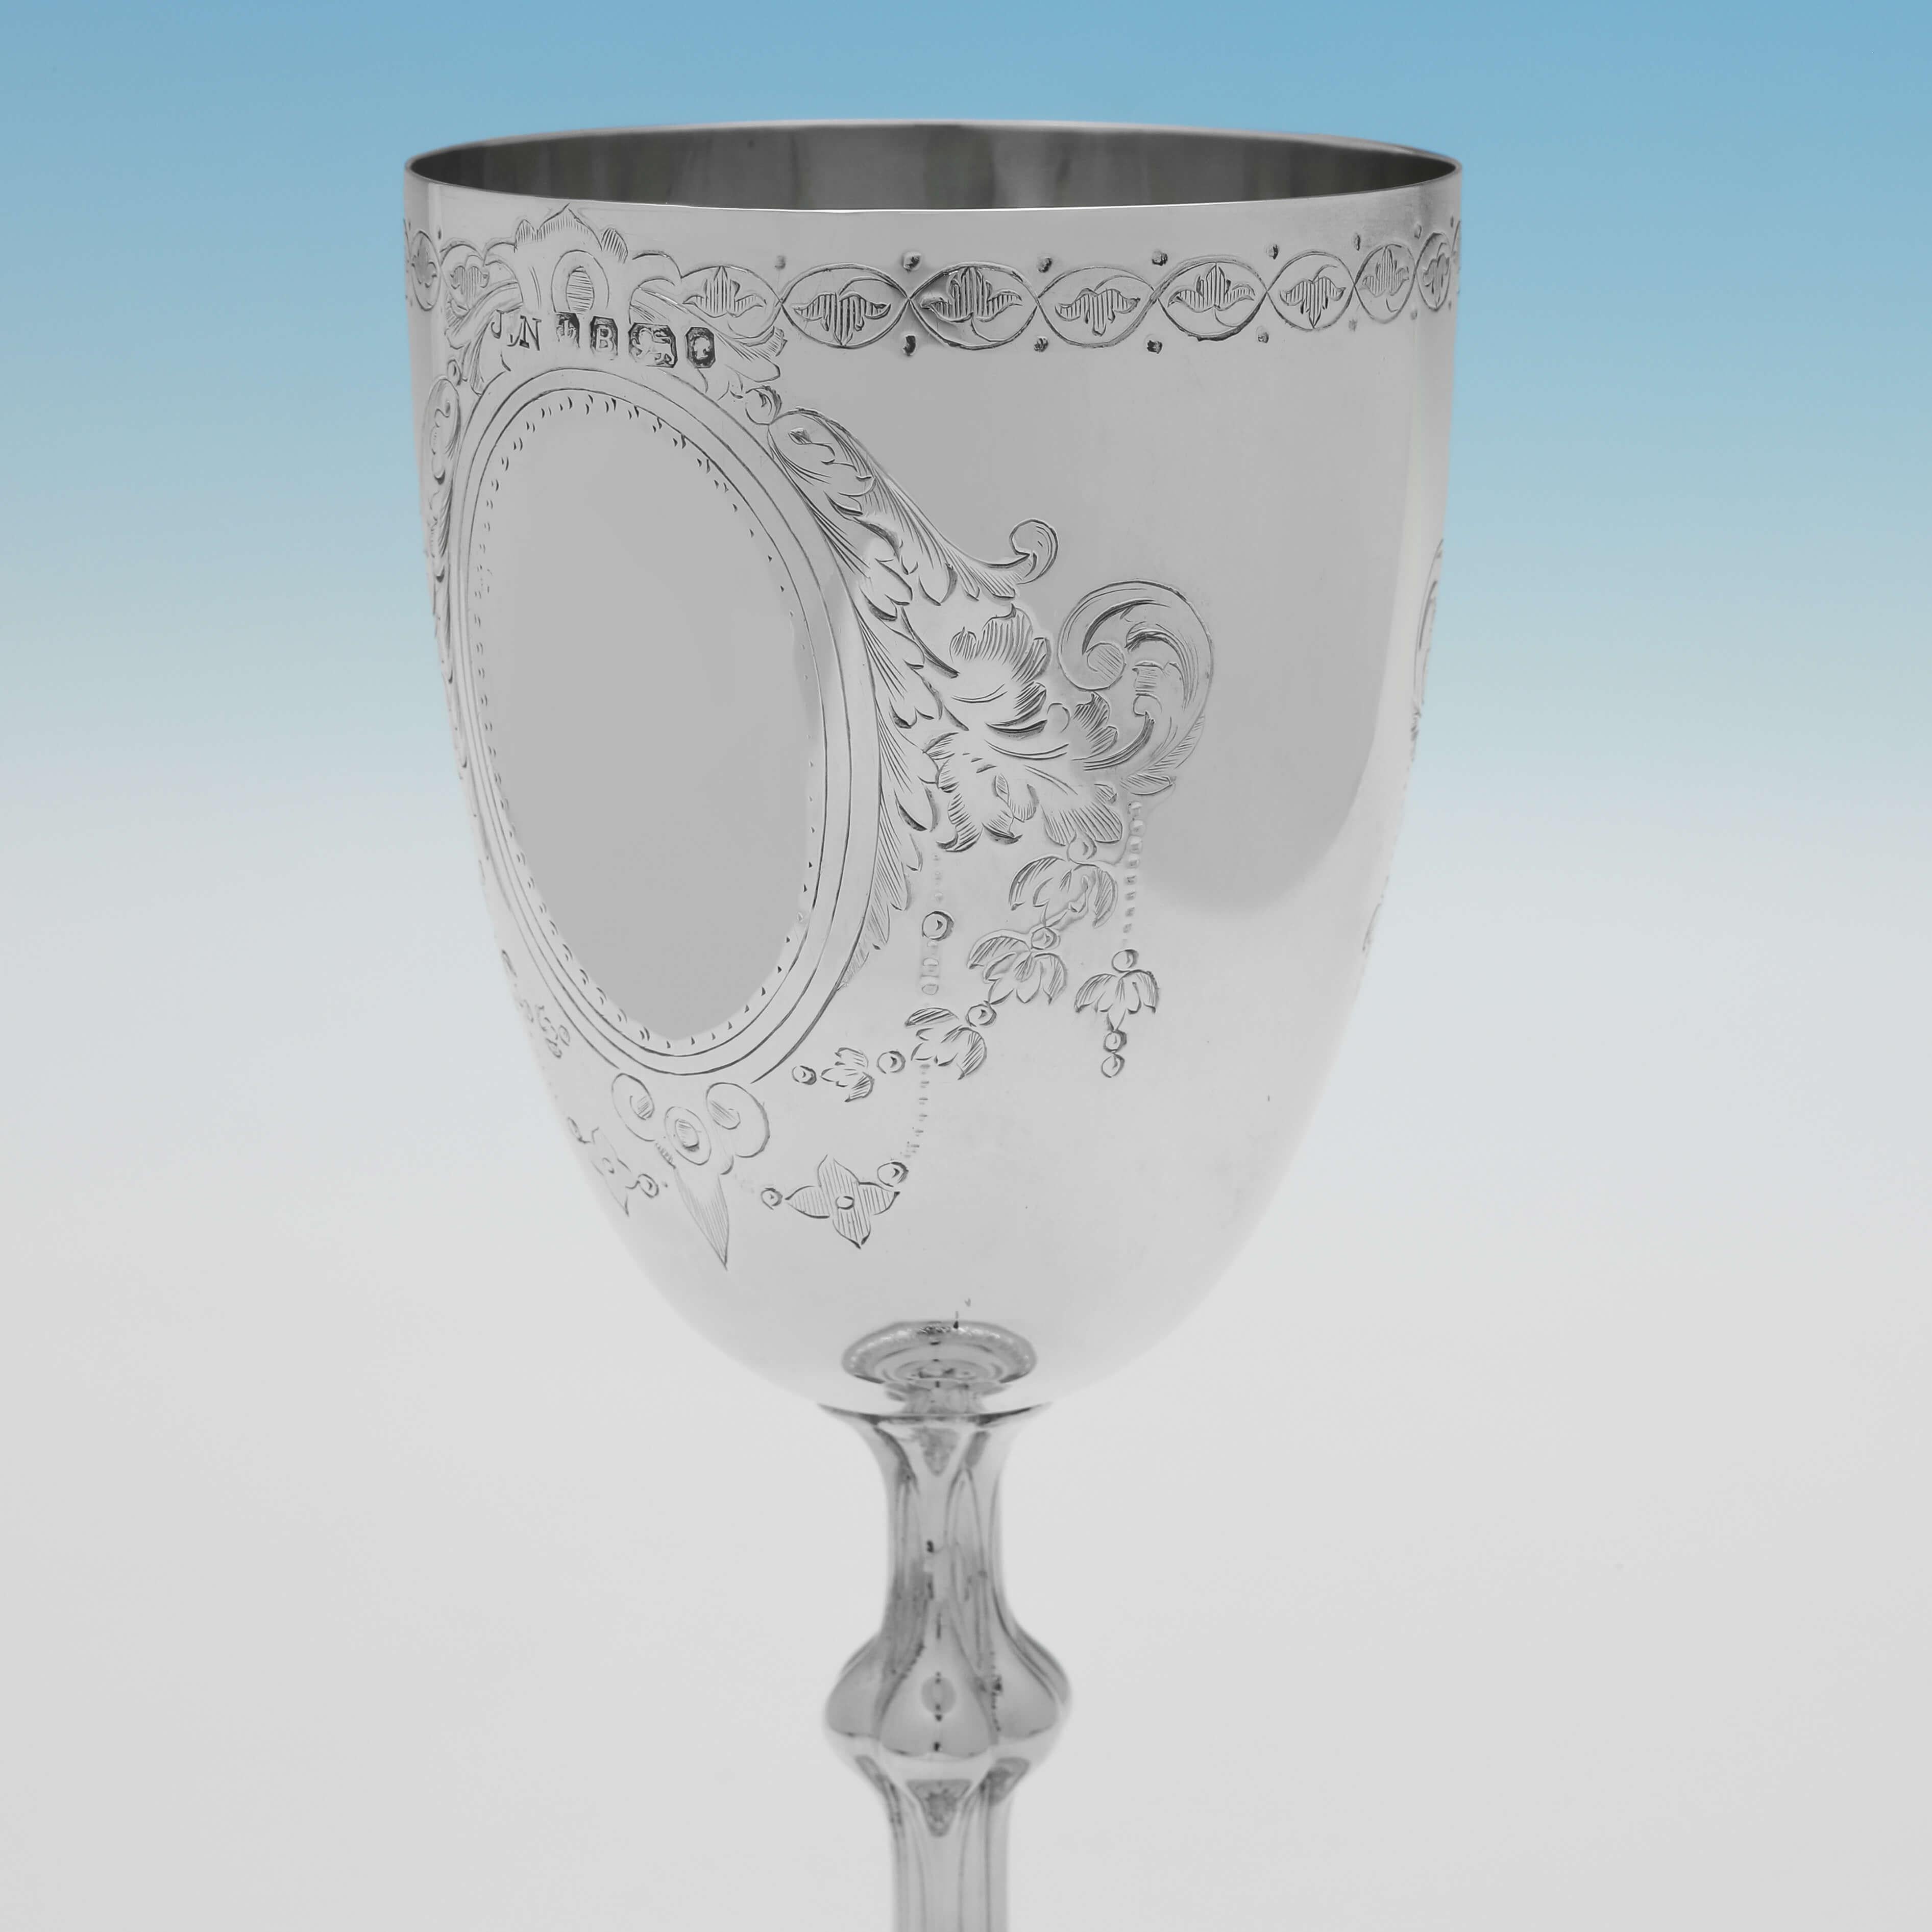 Hallmarked in Sheffield in 1869, this very attractive, Victorian, Antique Sterling Silver Goblet, features a shaped stem and engraved decoration throughout. The goblet measures 7.25